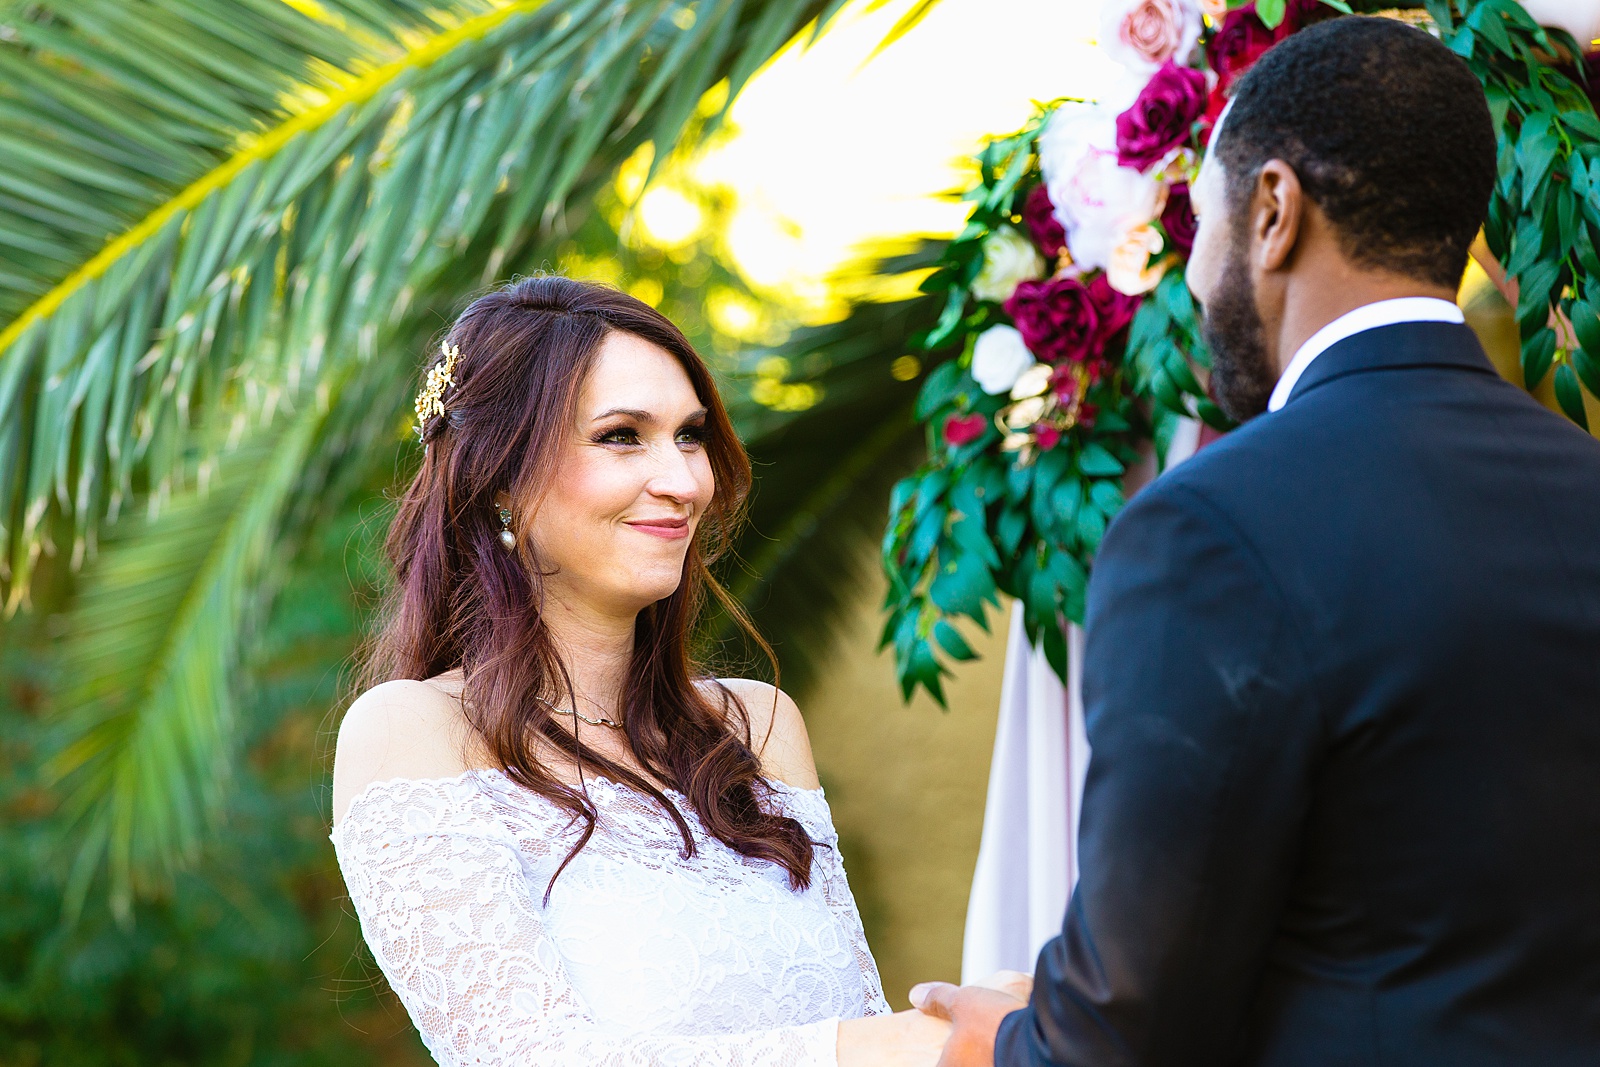 Bride looking at her groom during their wedding ceremony at Backyard Micro by Scottsdale wedding photographer PMA Photography.